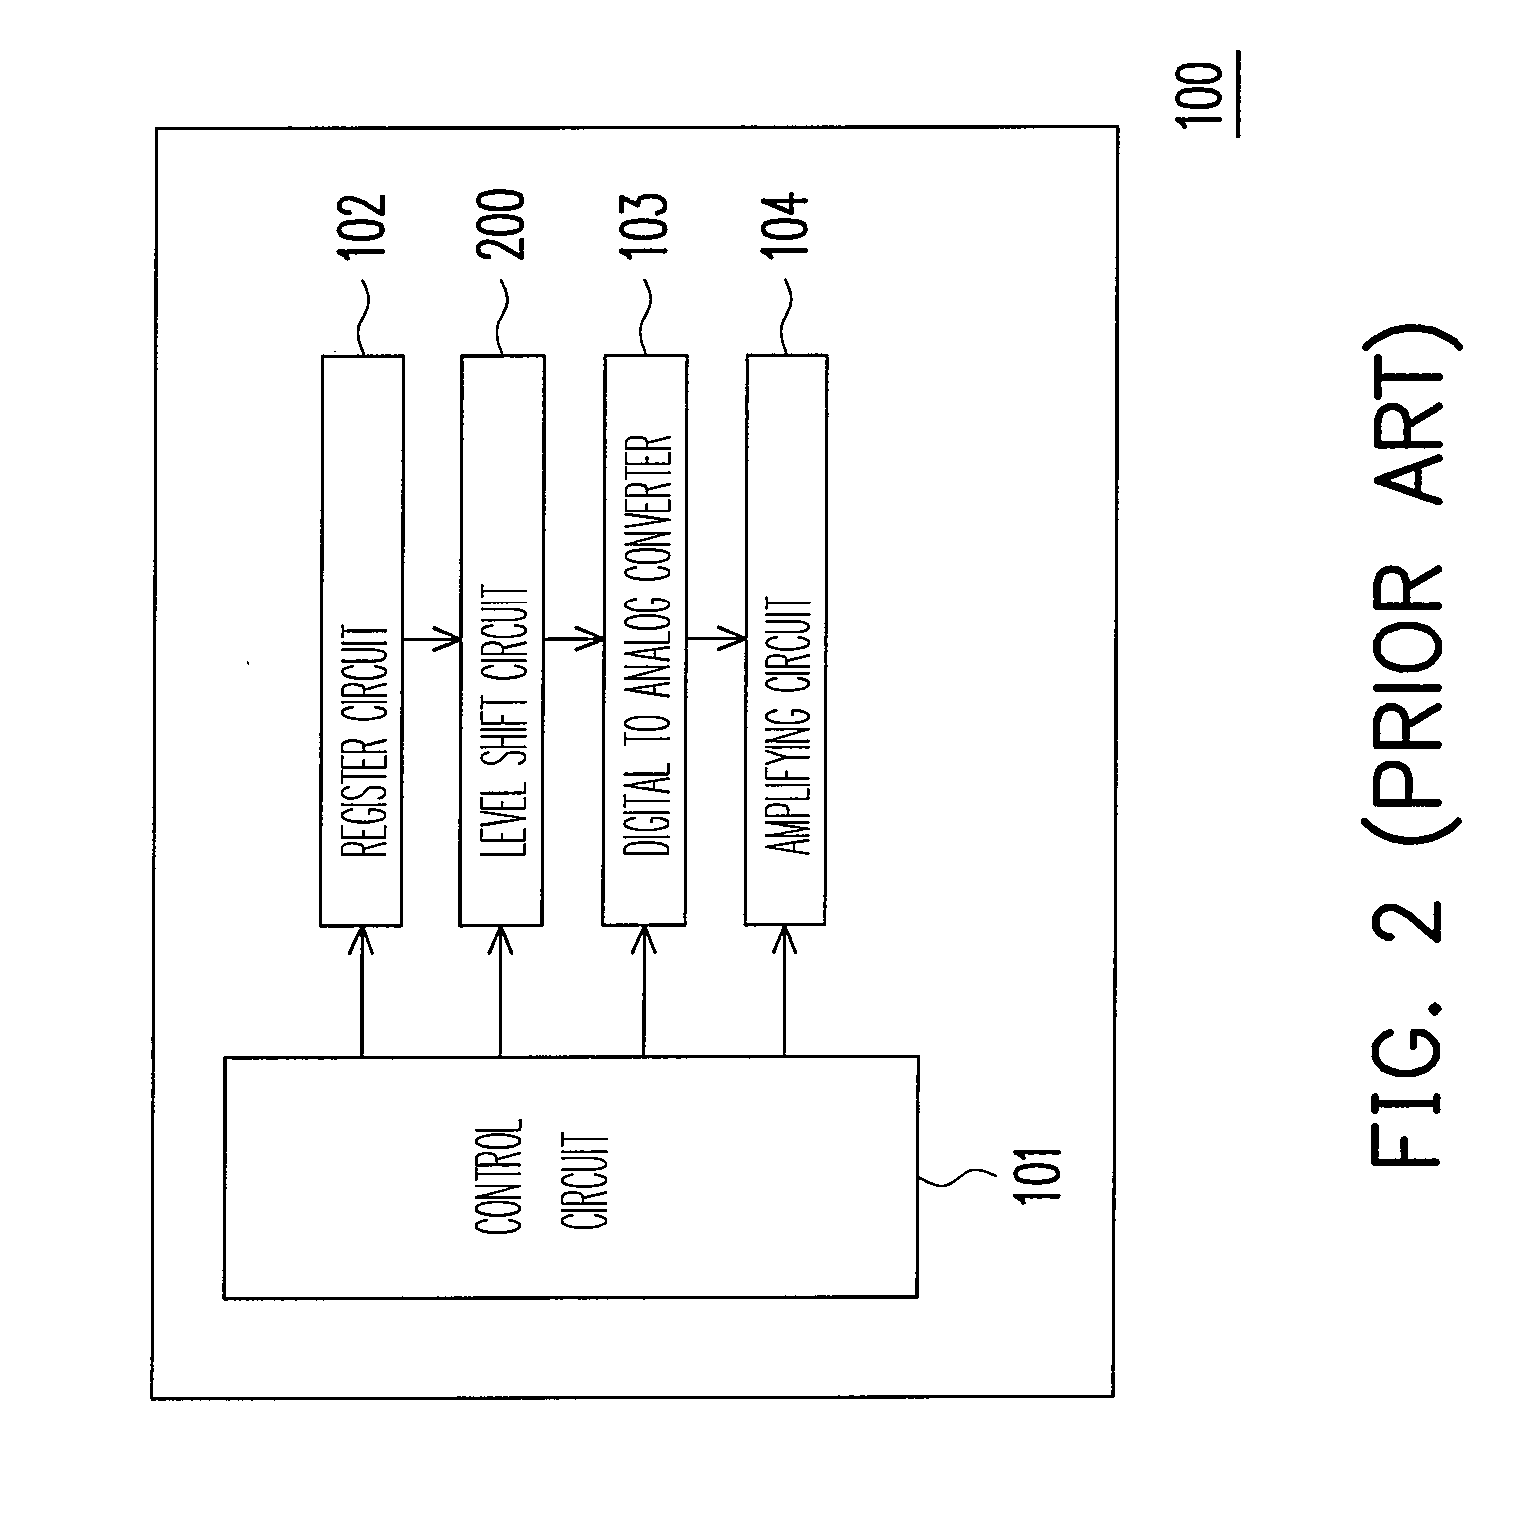 Level shift circuit for a driving circuit